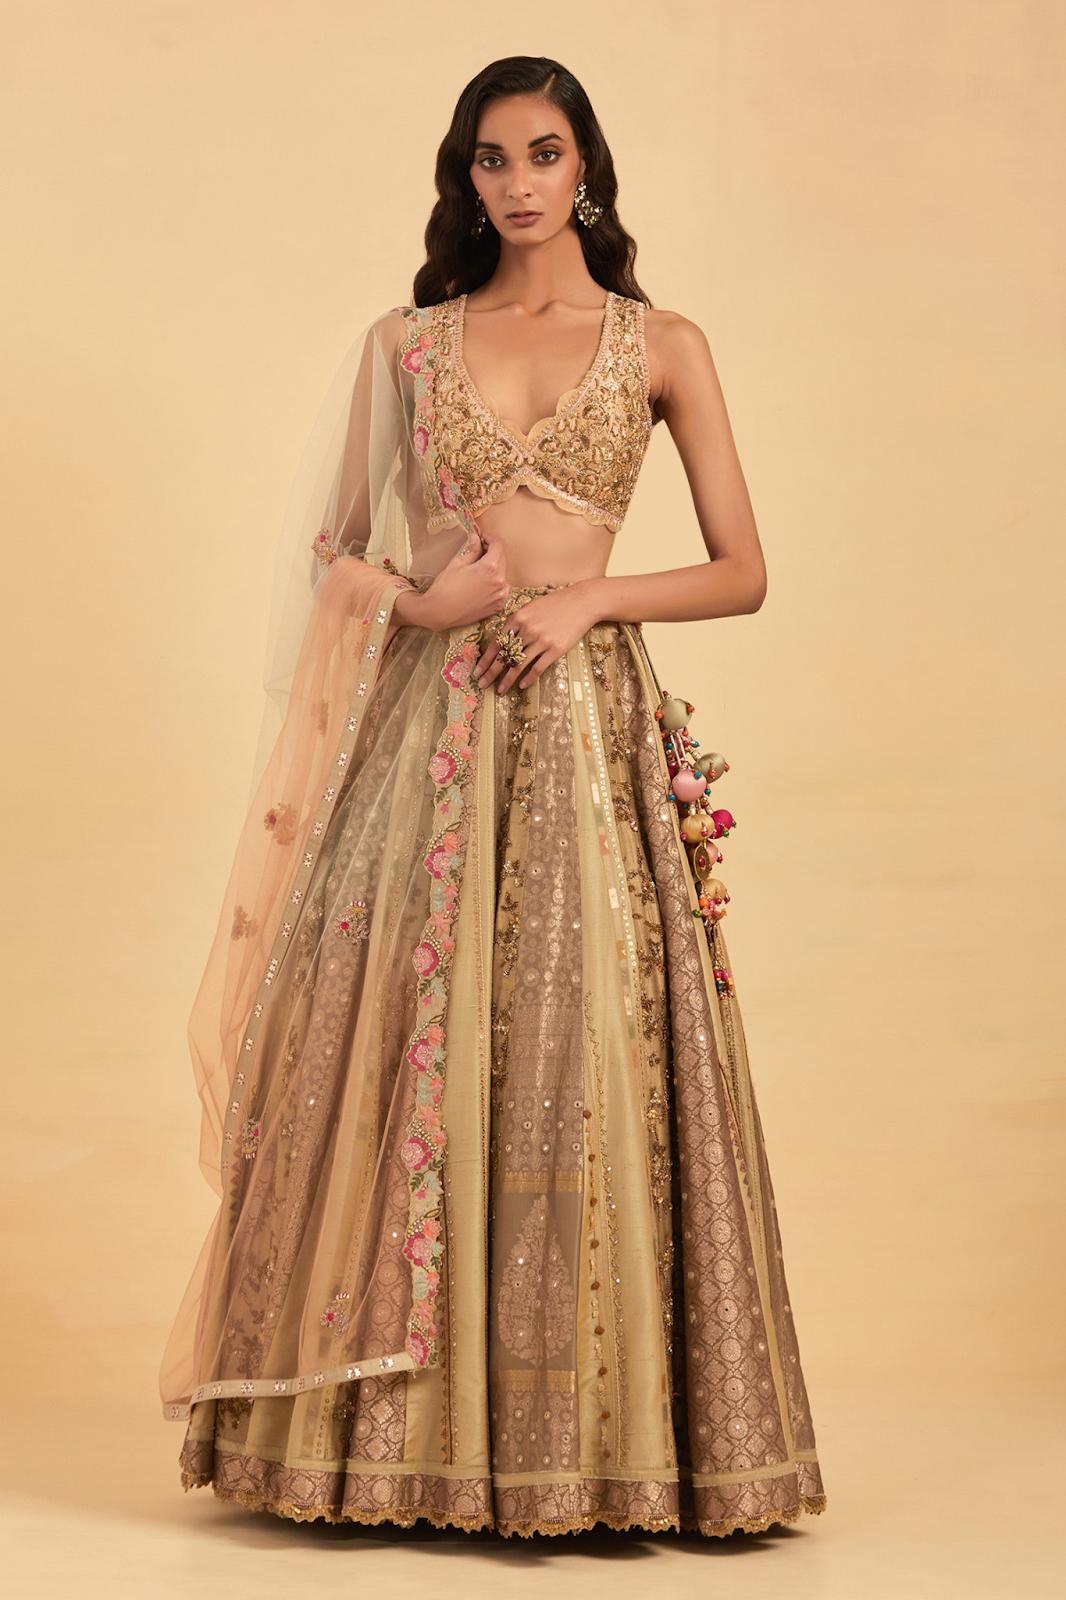 Golden Bridal Lehenga has become very popular with Indian Brides for their  wedding, reception a… | Indian bridal outfits, Golden bridal lehenga,  Indian bridal dress